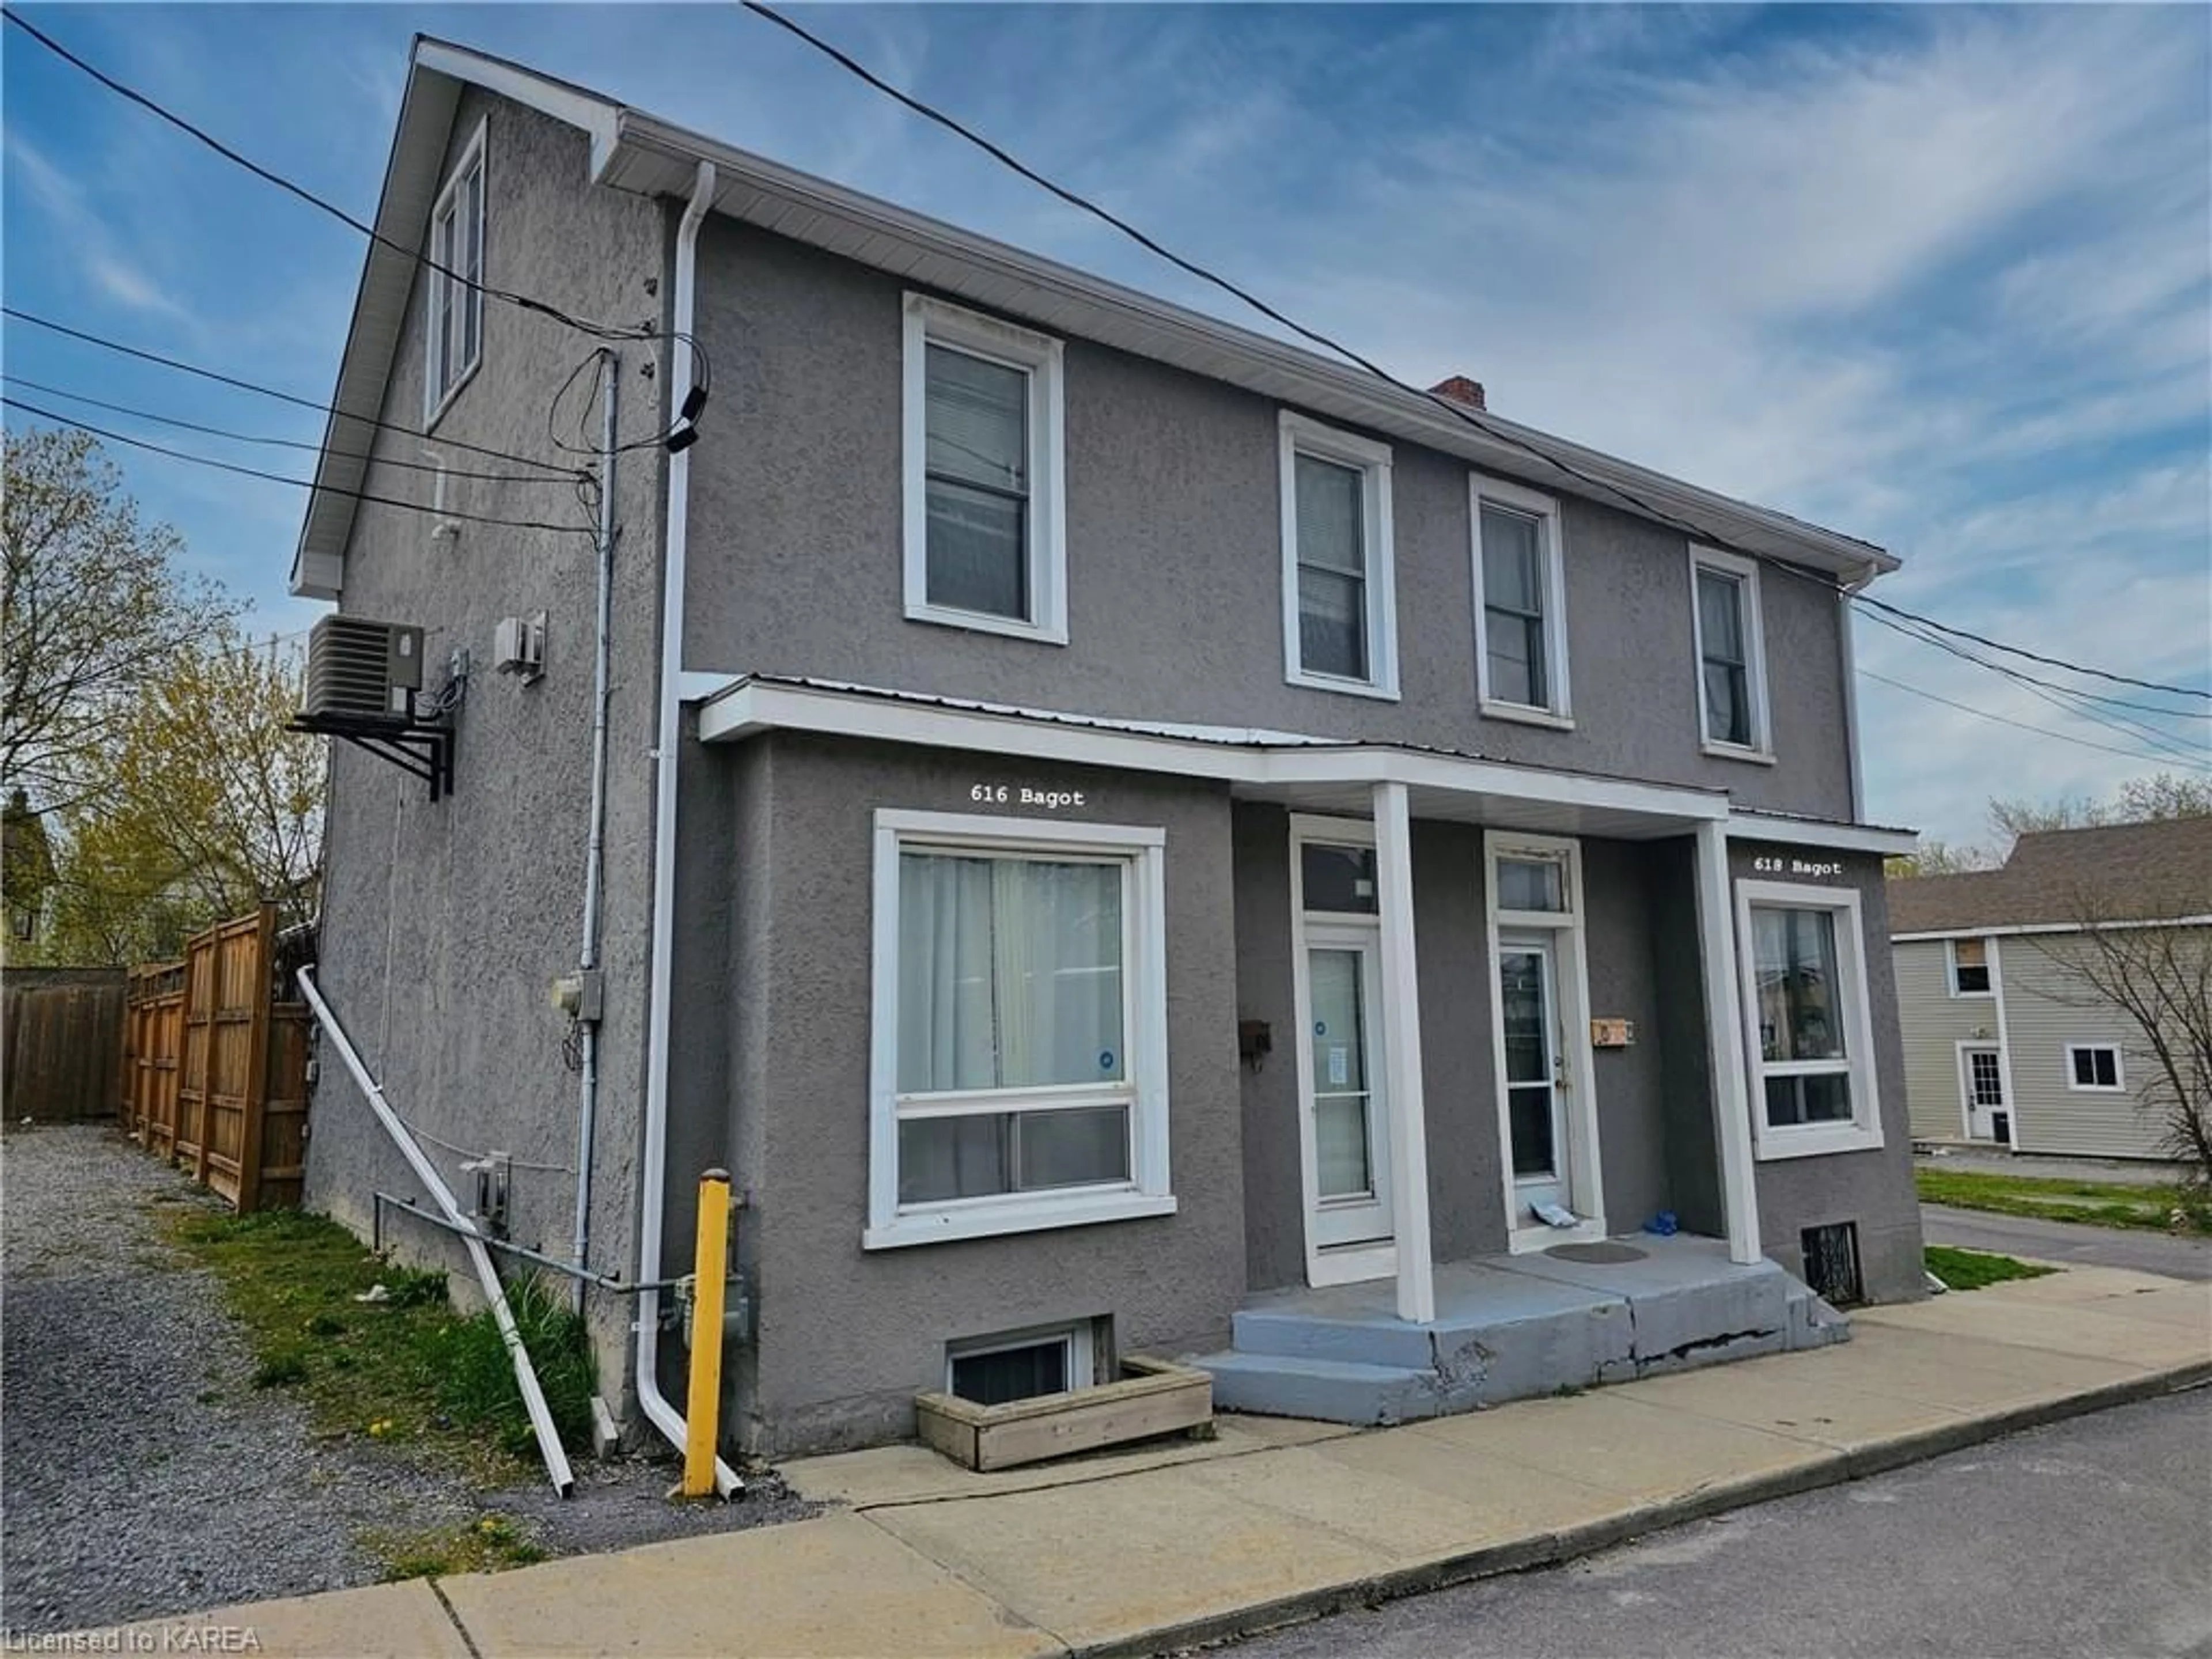 A pic from exterior of the house or condo for 616 Bagot St, Kingston Ontario K7K 3E5